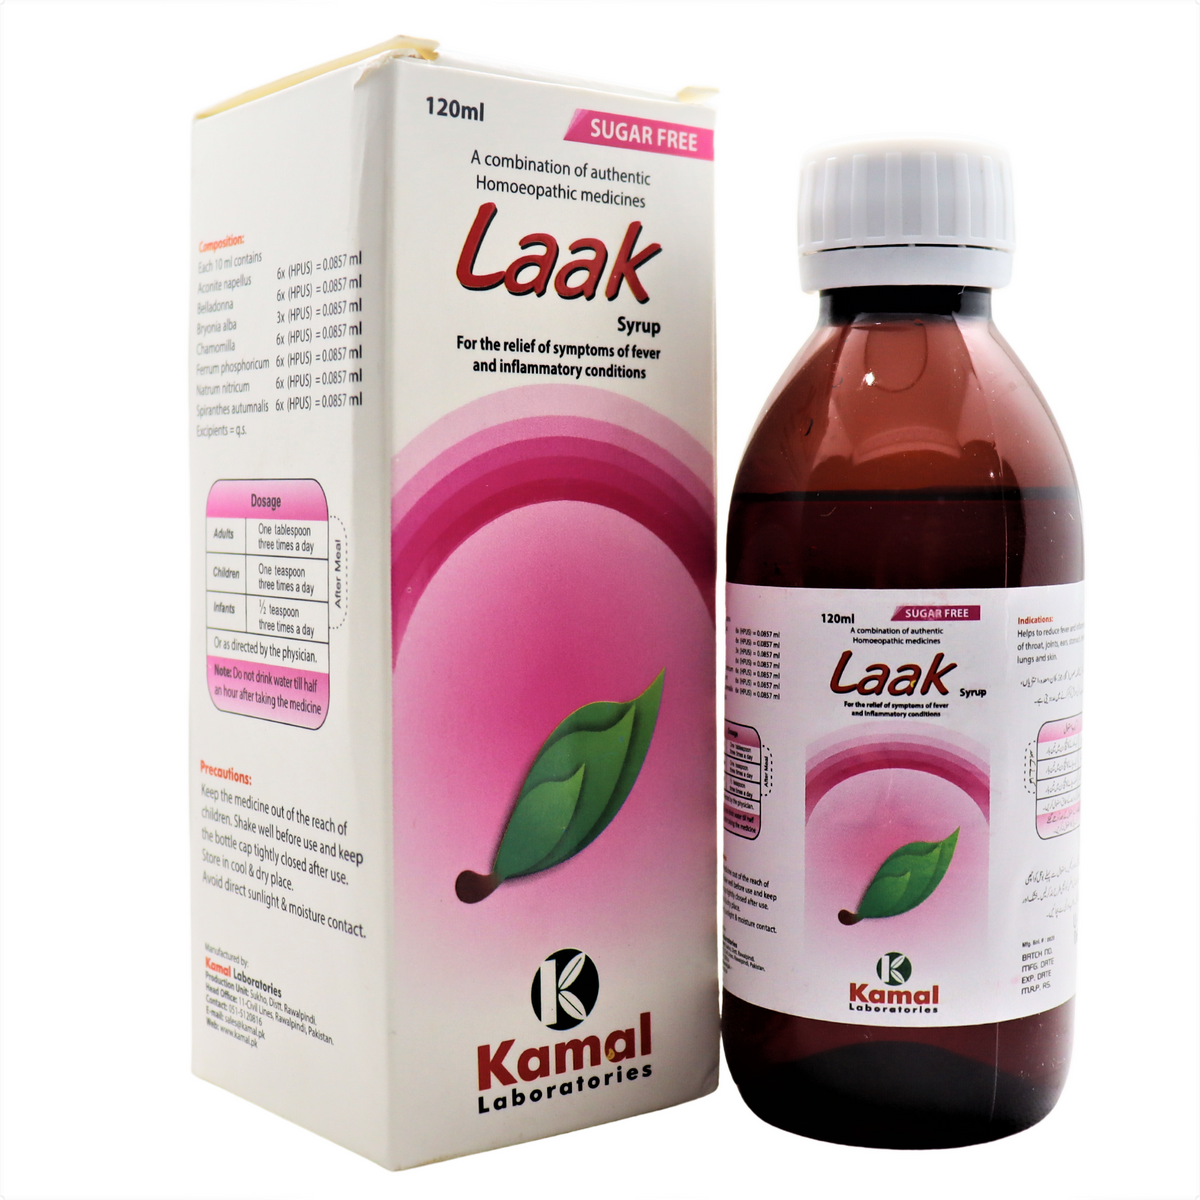 Laak (Syrup)